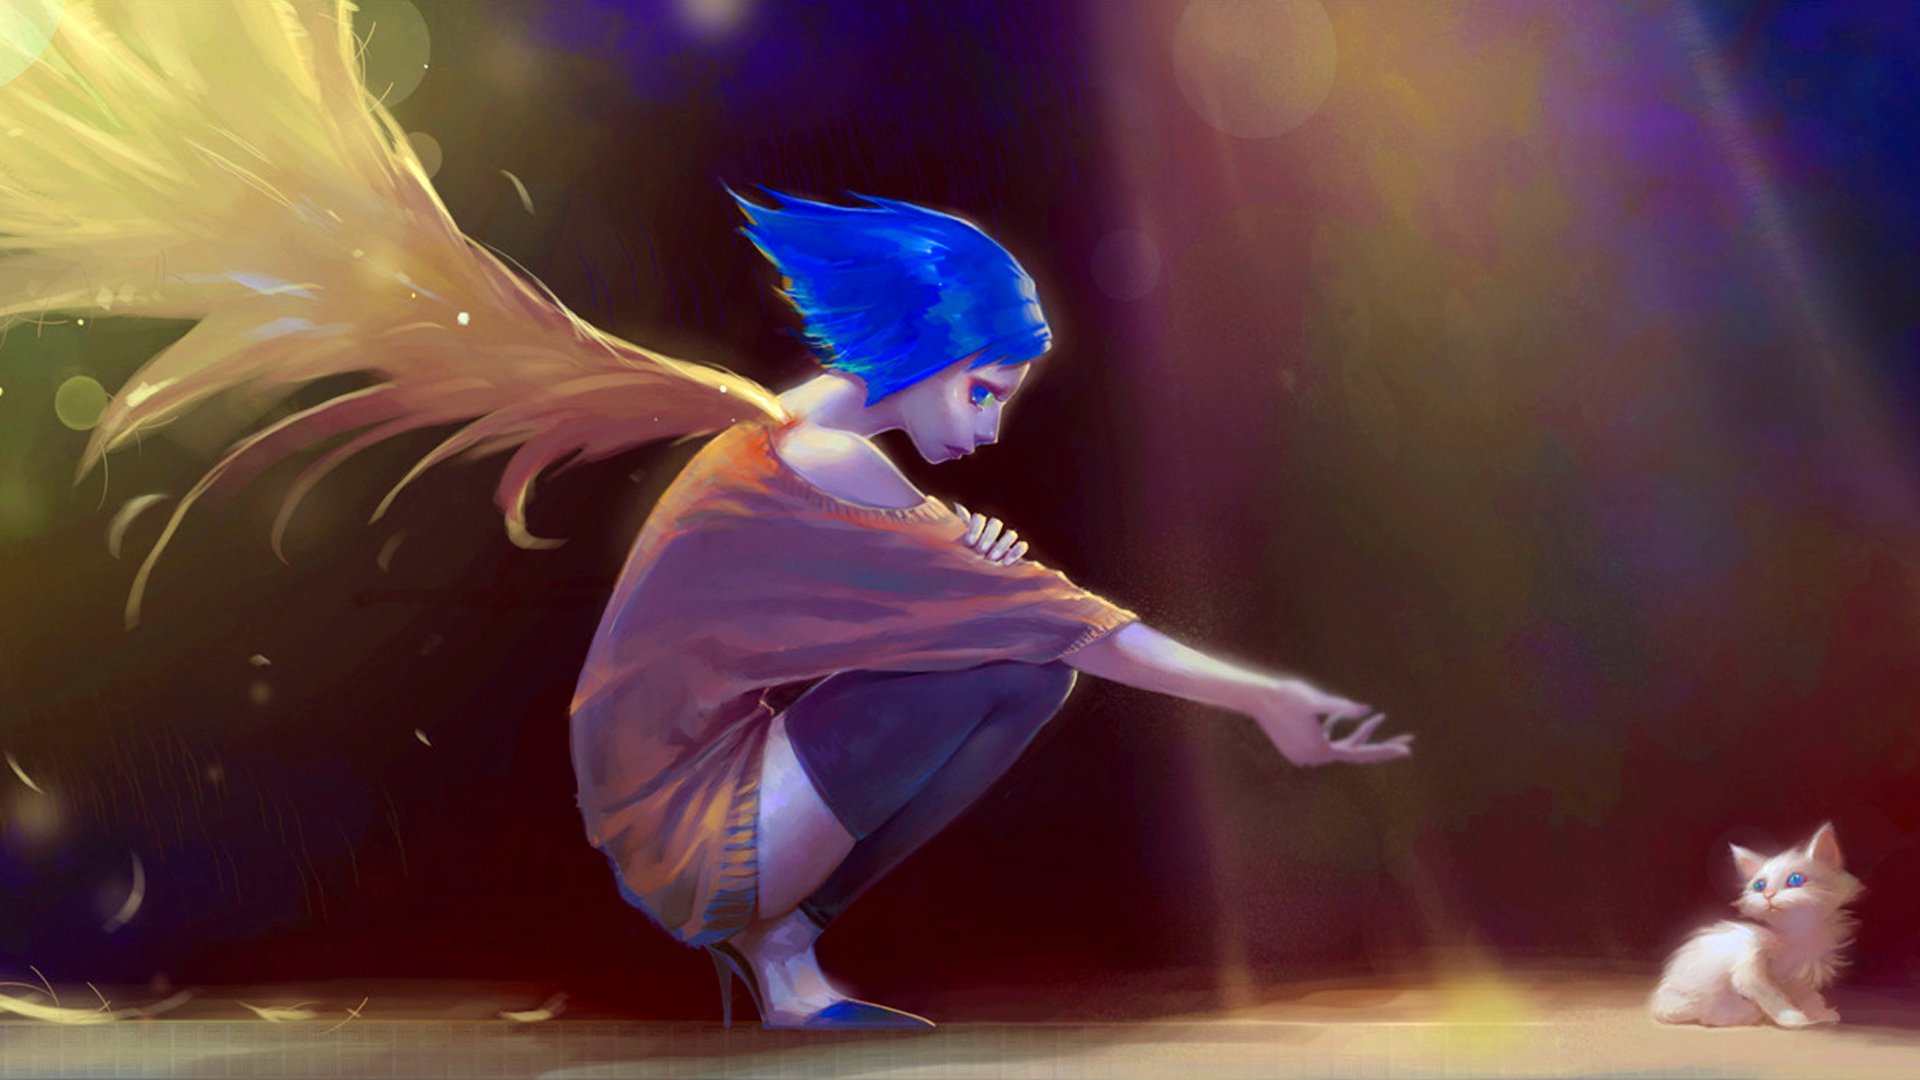 Fantasy HD wallpaper featuring an angelic figure with blue hair reaching out to a kitten under mystical lights.